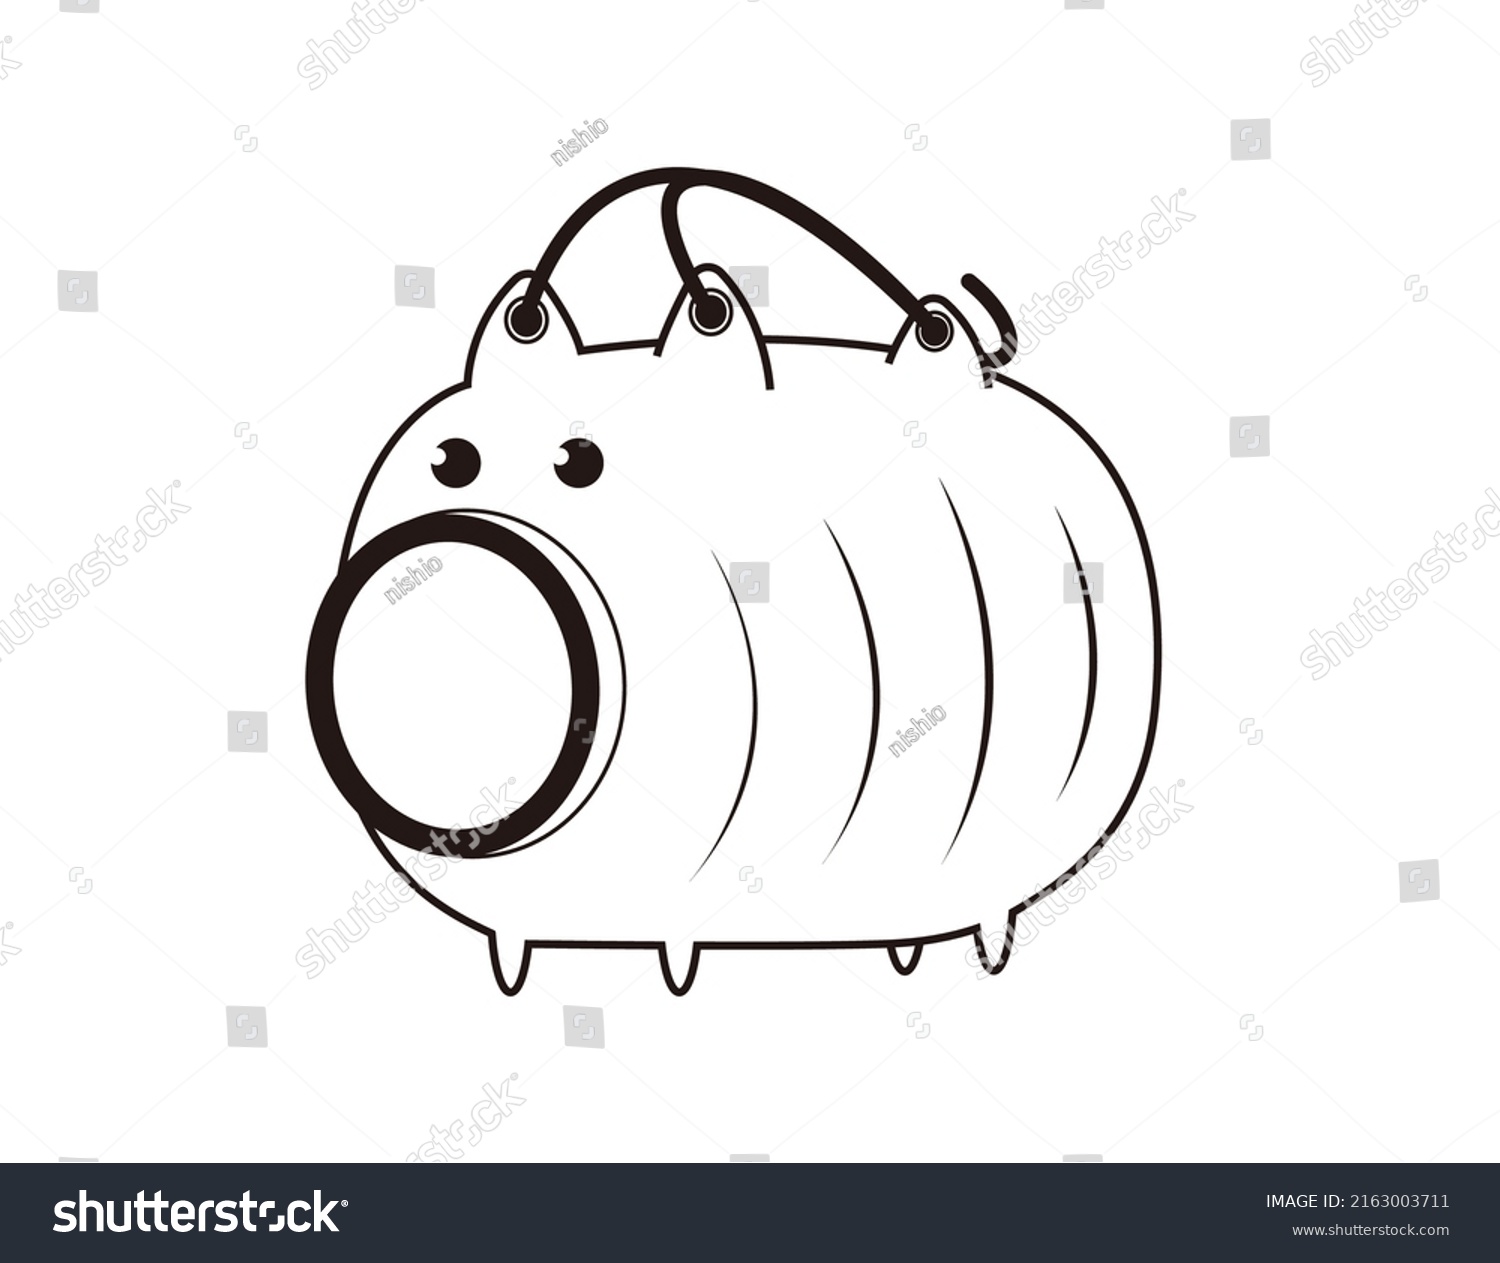 SVG of Mosquito coil holder in the shape of a pig made of ceramic .　Vector illustration. svg